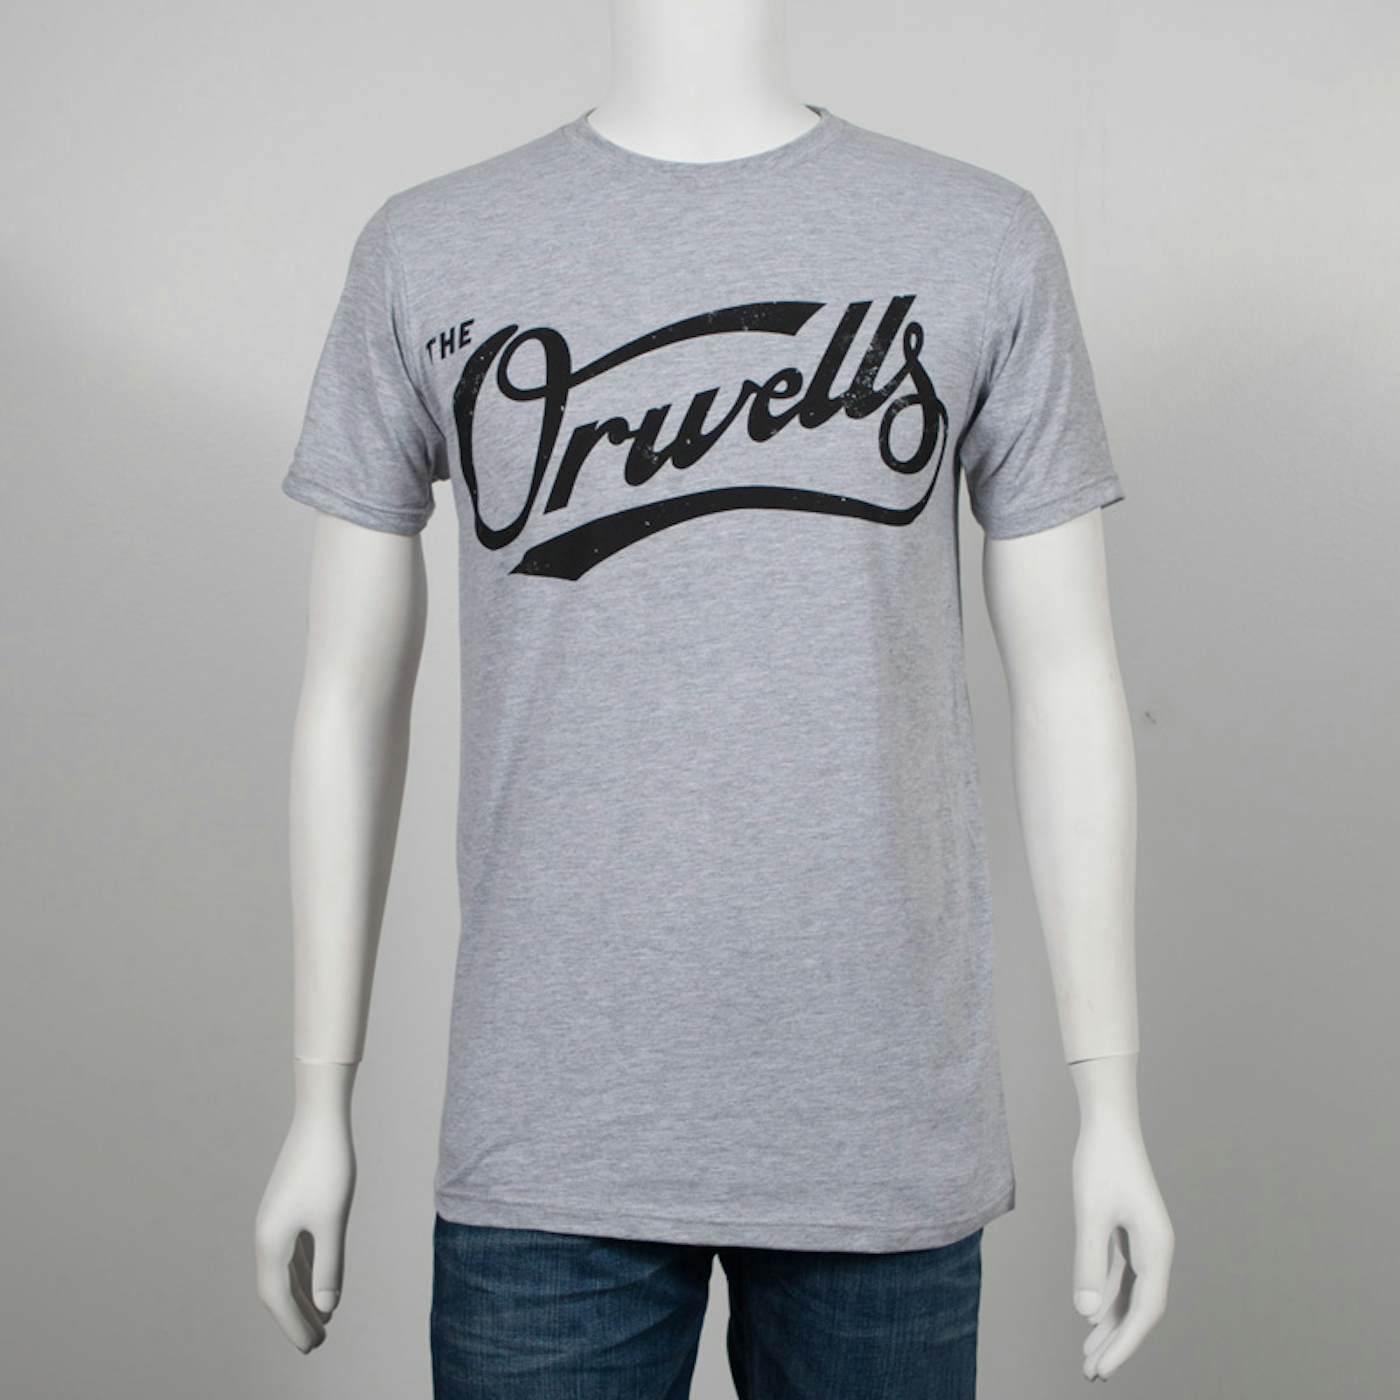 The Orwells Old Time T-Shirt